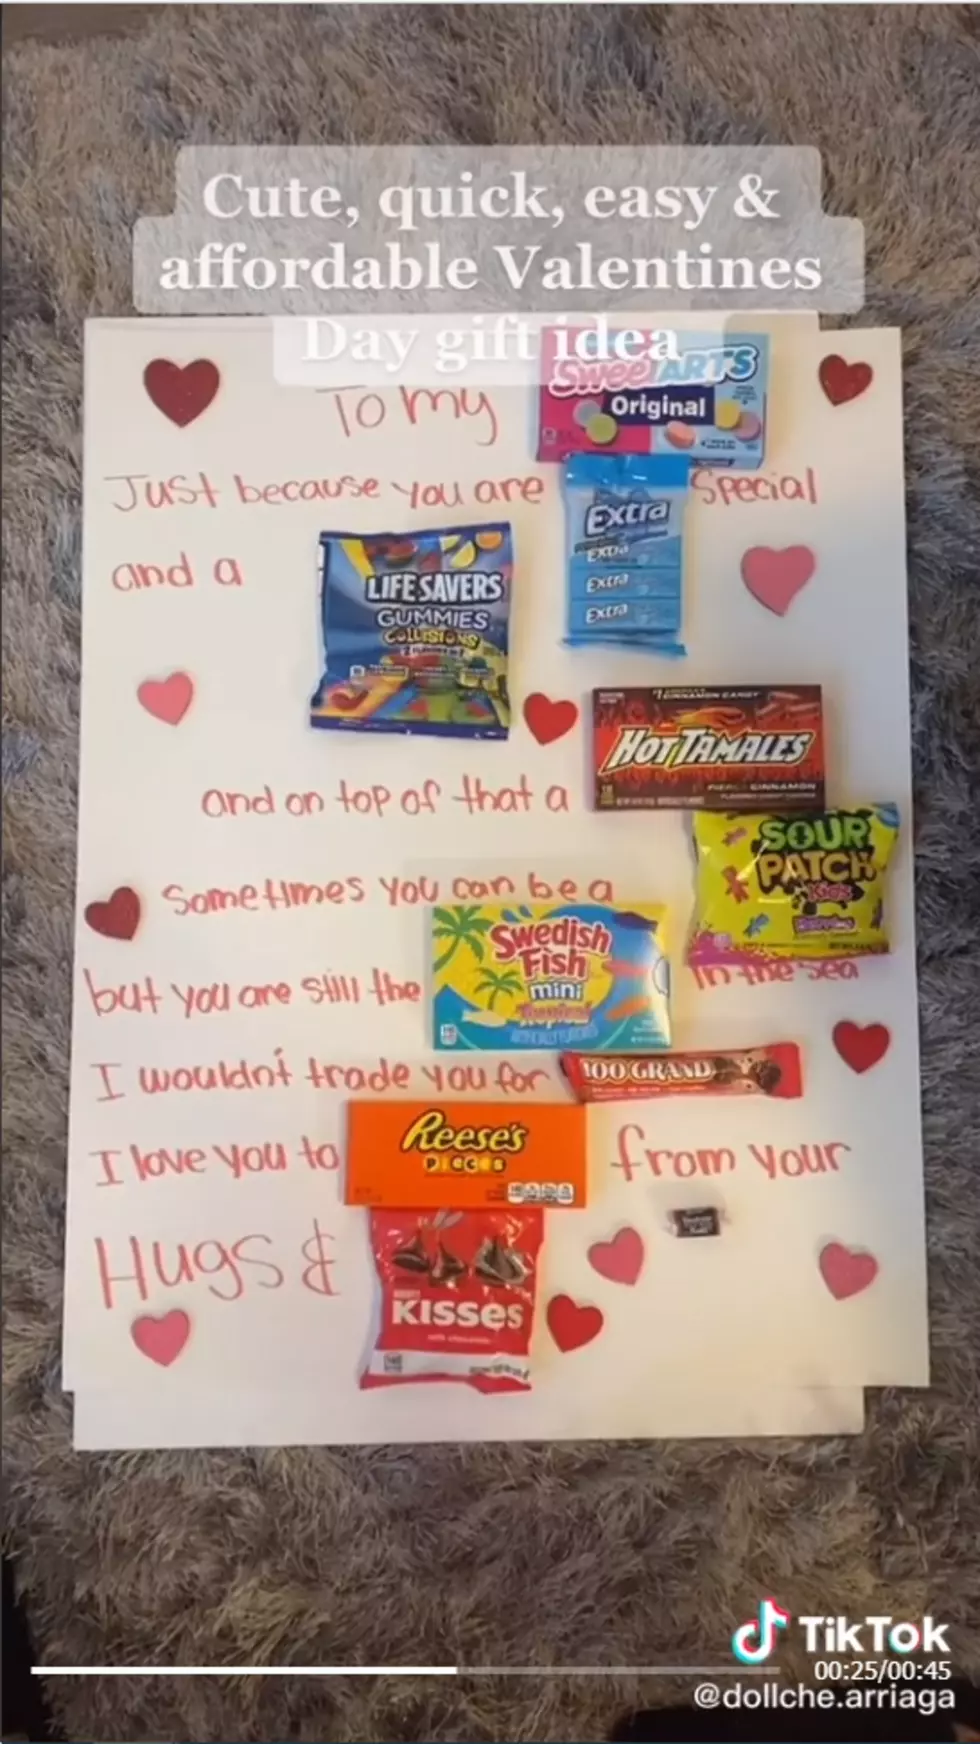 100 Cute Valentine's Day Gifts For Boyfriends That Are Sweet and Romantic -  Hike n Dip  Valentine's day gift baskets, Valentines day gifts for him  boyfriends, Simple valentines gifts